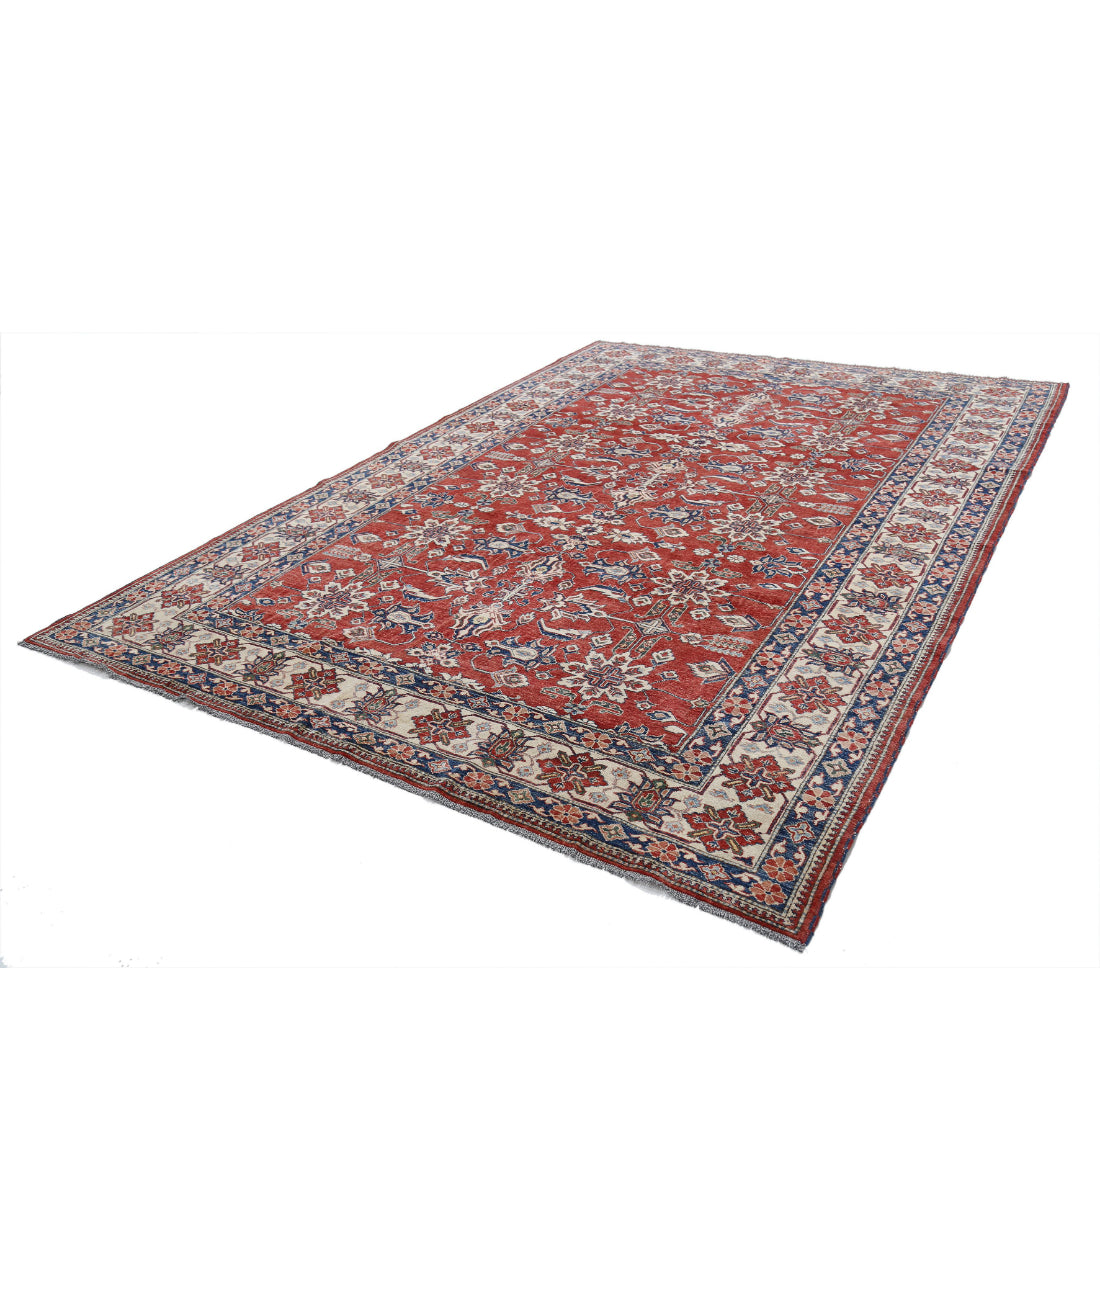 Hand Knotted Royal Kazak Wool Rug - 8'4'' x 11'8'' 8'4'' x 11'8'' (250 X 350) / Red / Ivory